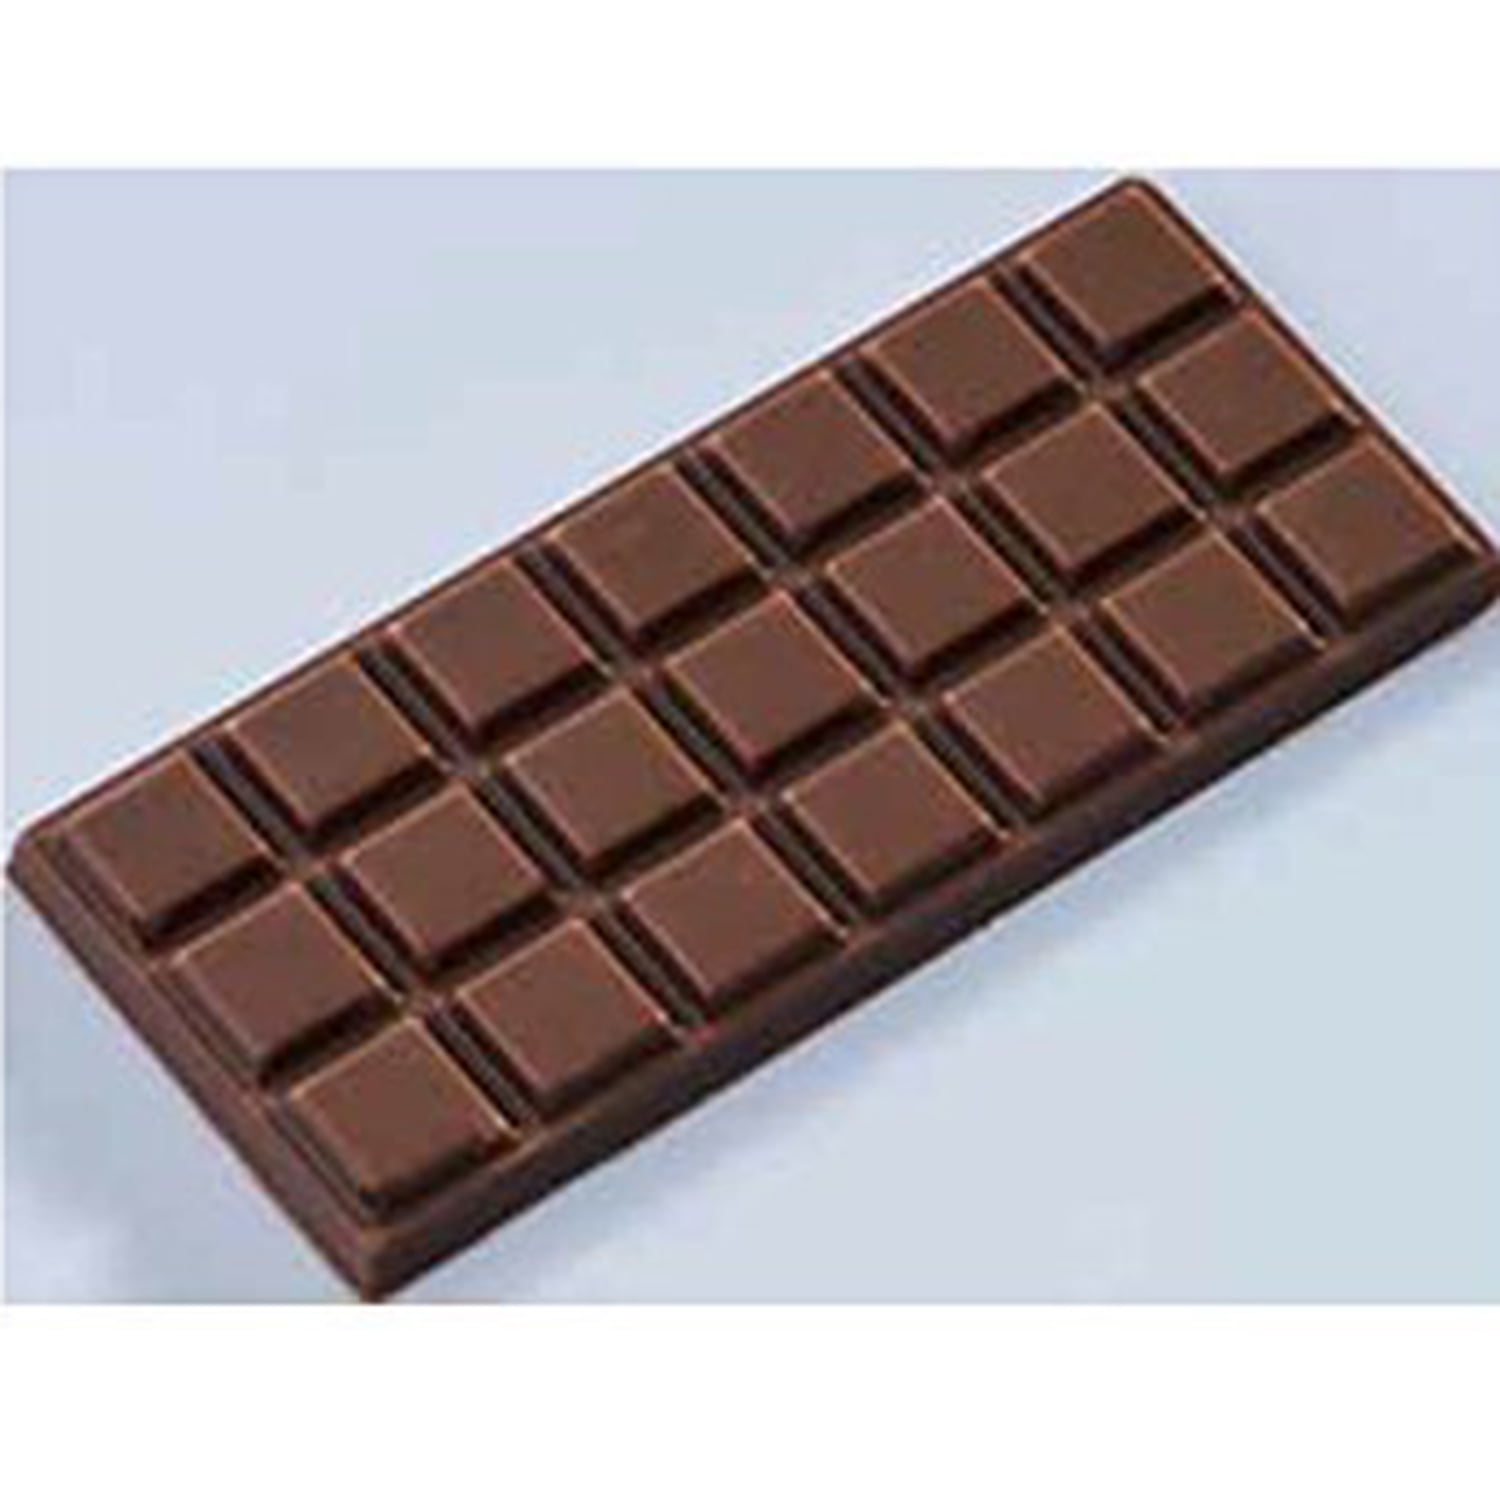 Chocolate Mould for Tablets, Swing, Martellato